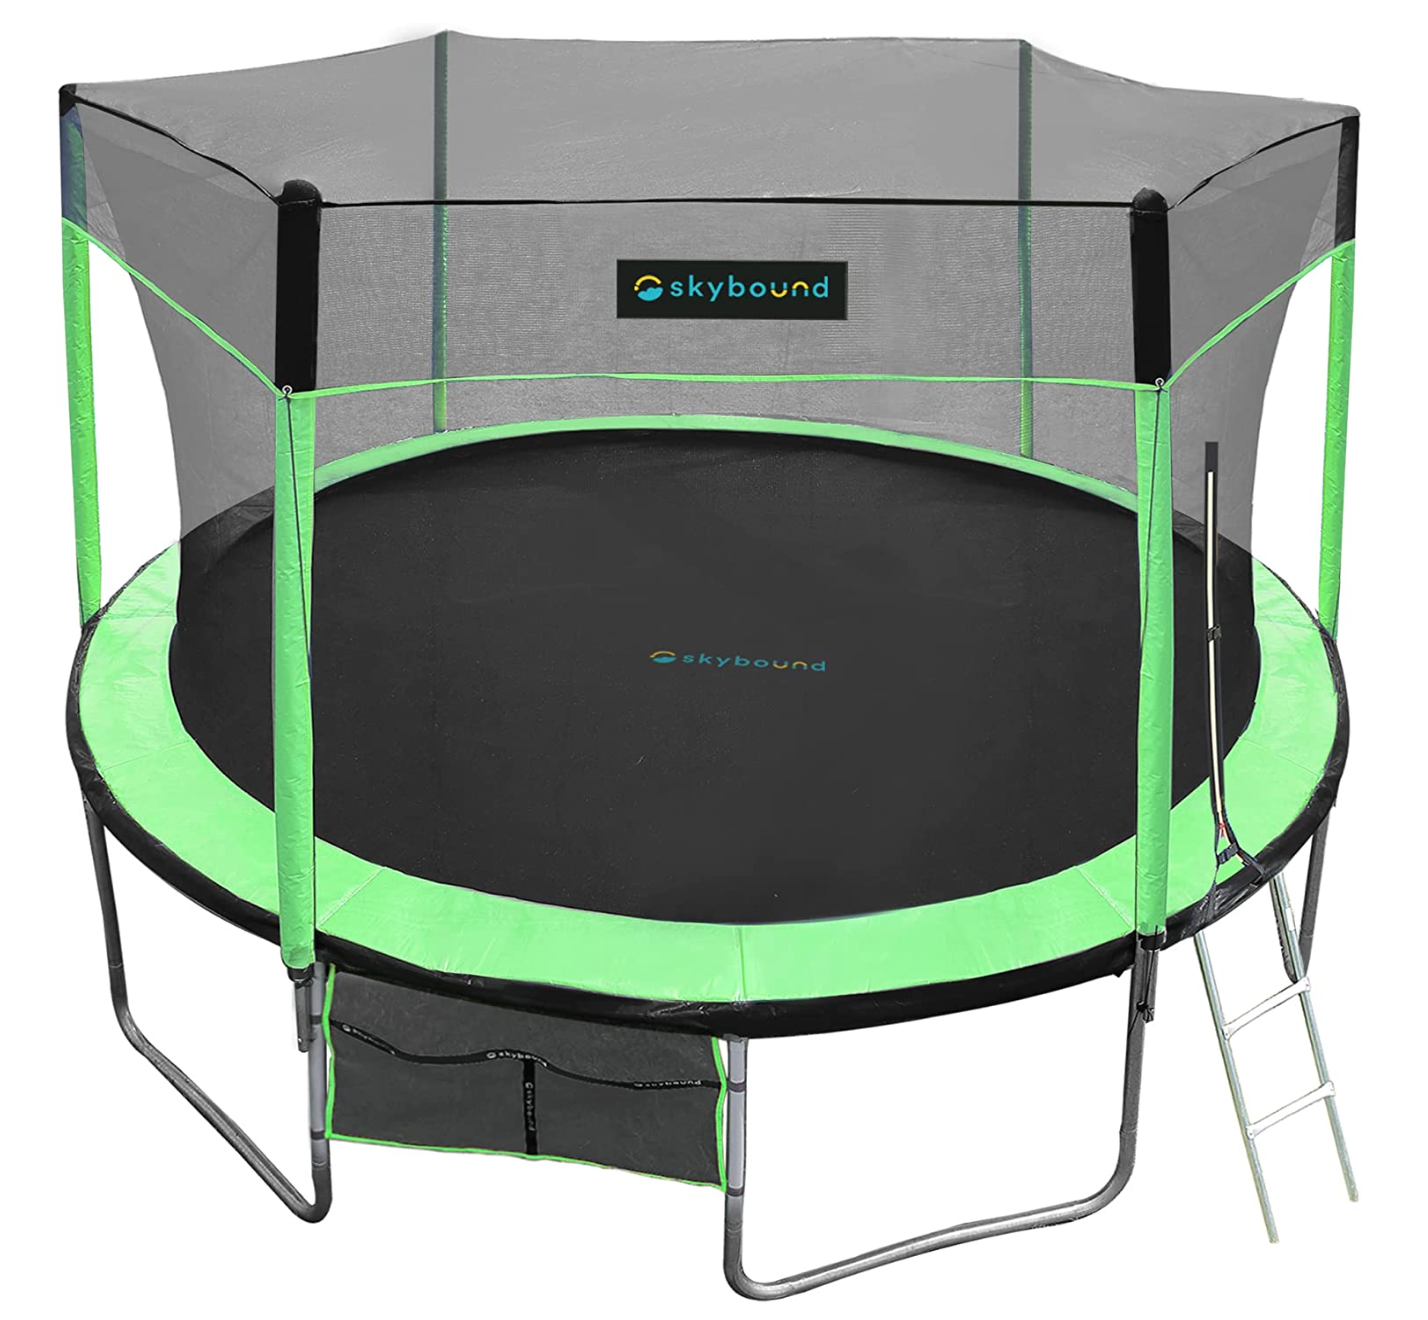 Skybound soar 15ft tramoline green with enclosure net